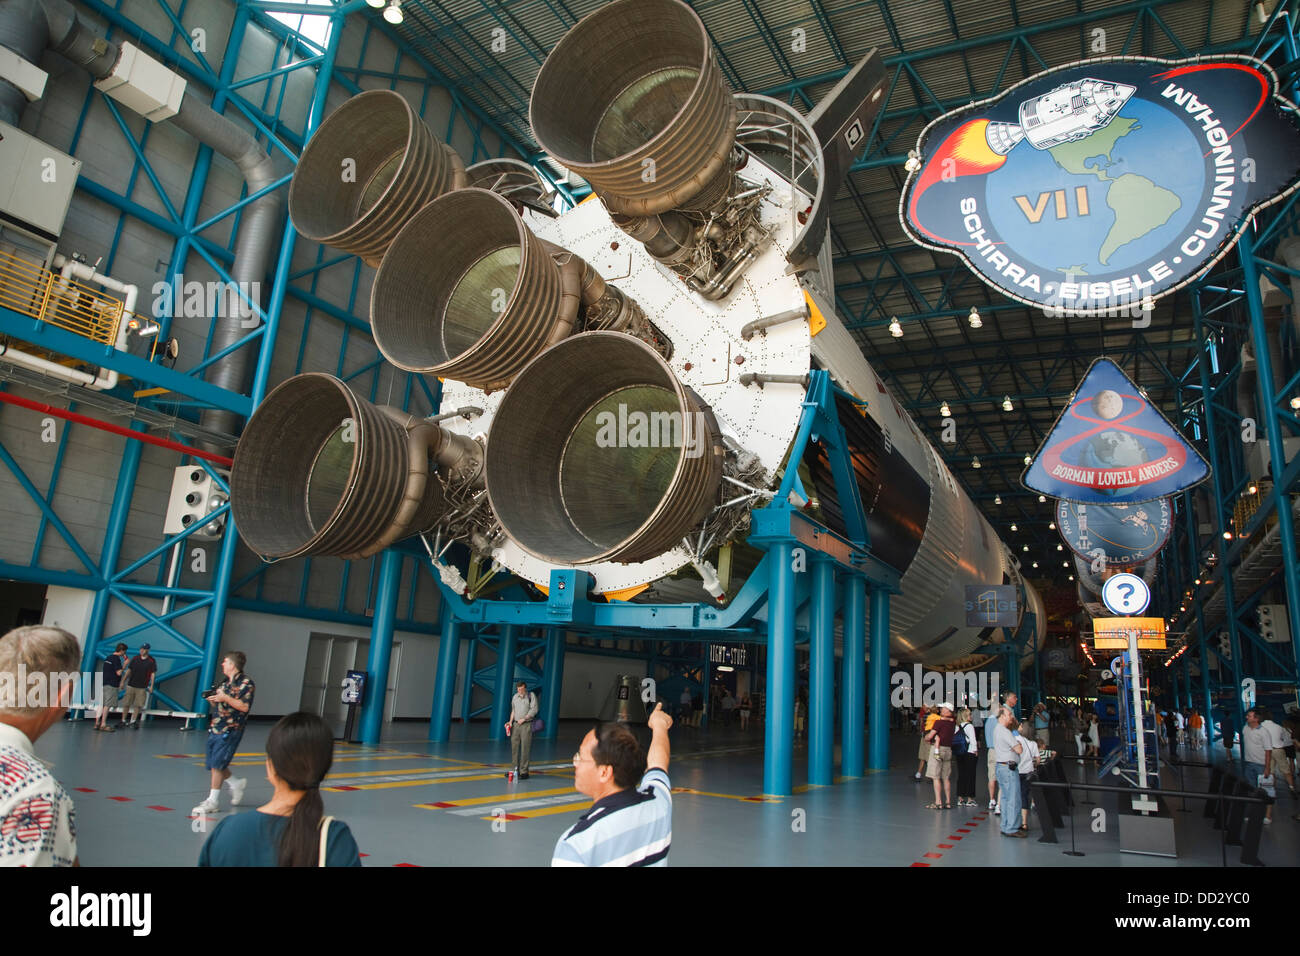 Saturn V Rocket at John F Kennedy Space Centre, Cape Canaveral, Florida Stock Photo